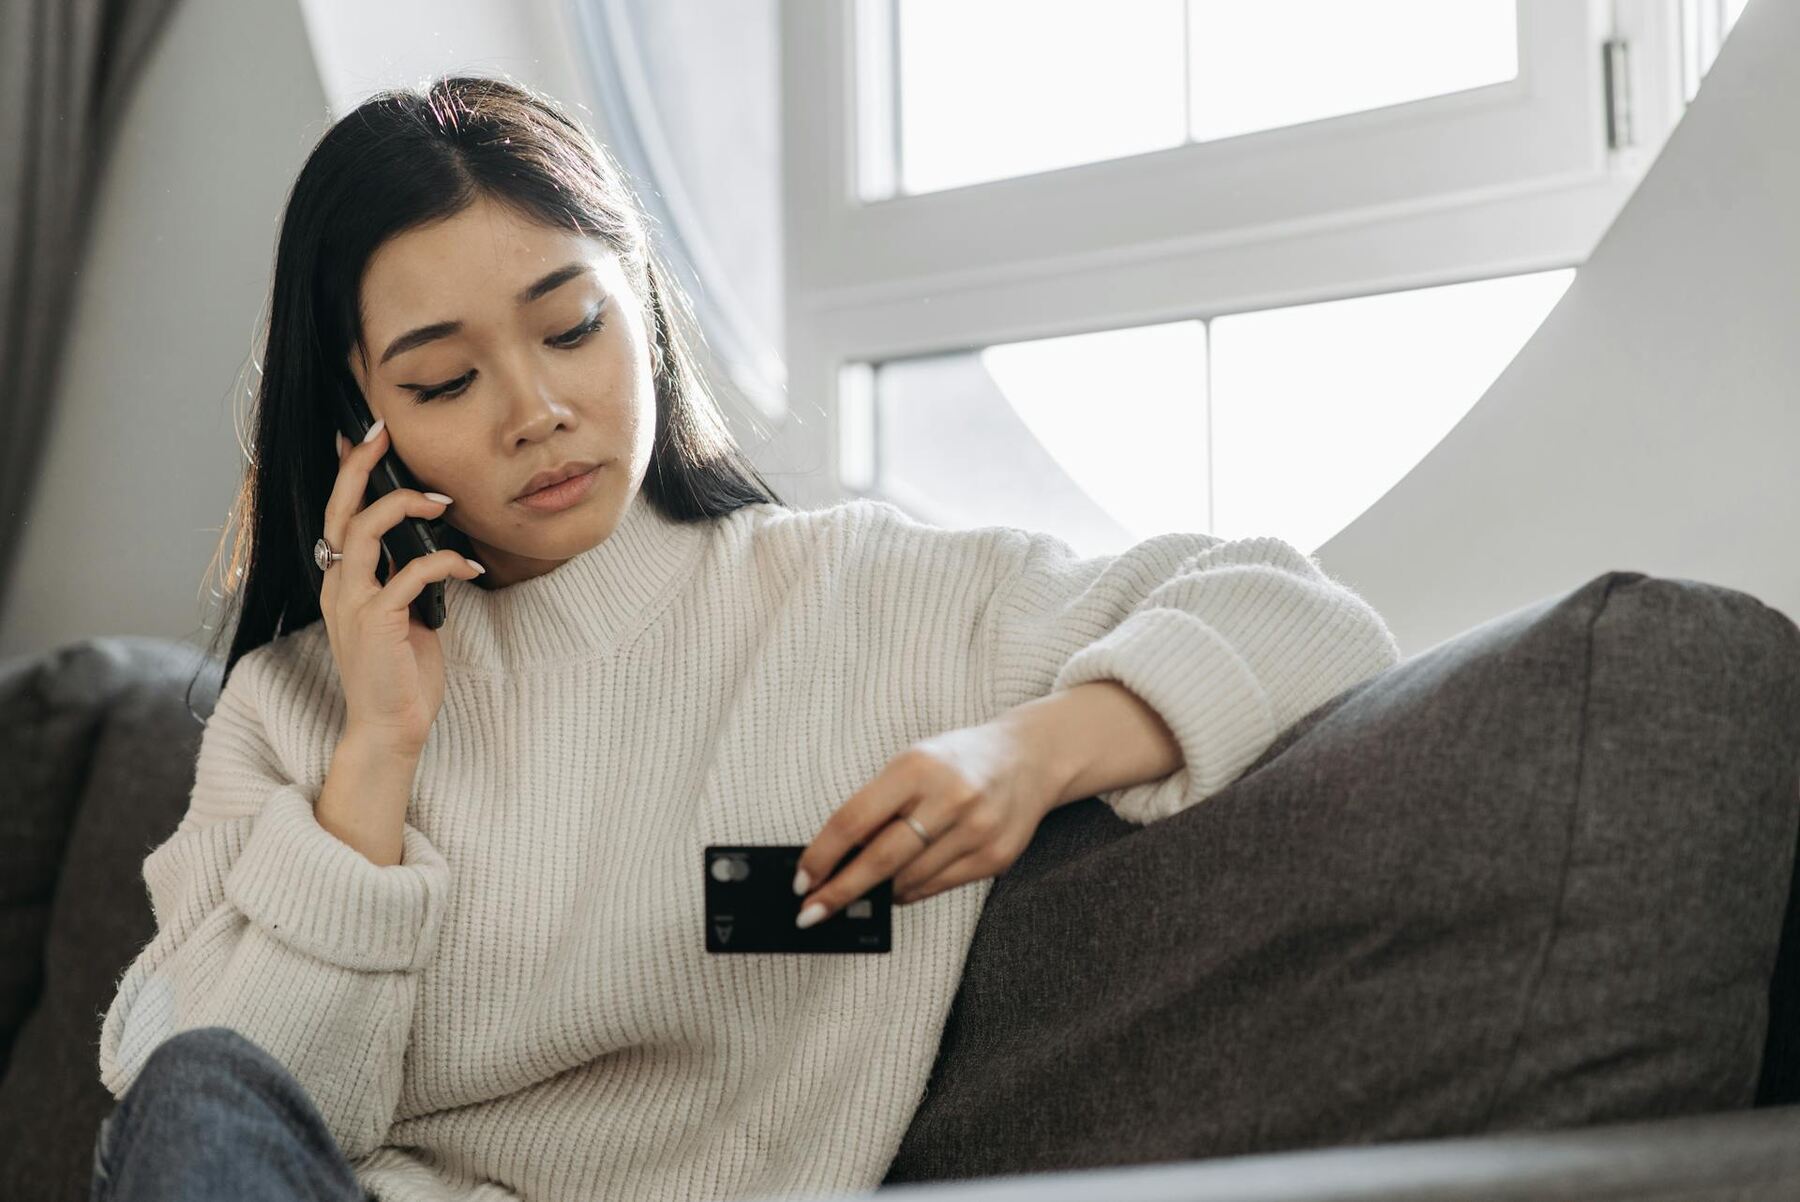 Woman sitting on couch, holding credit card and mobile phone